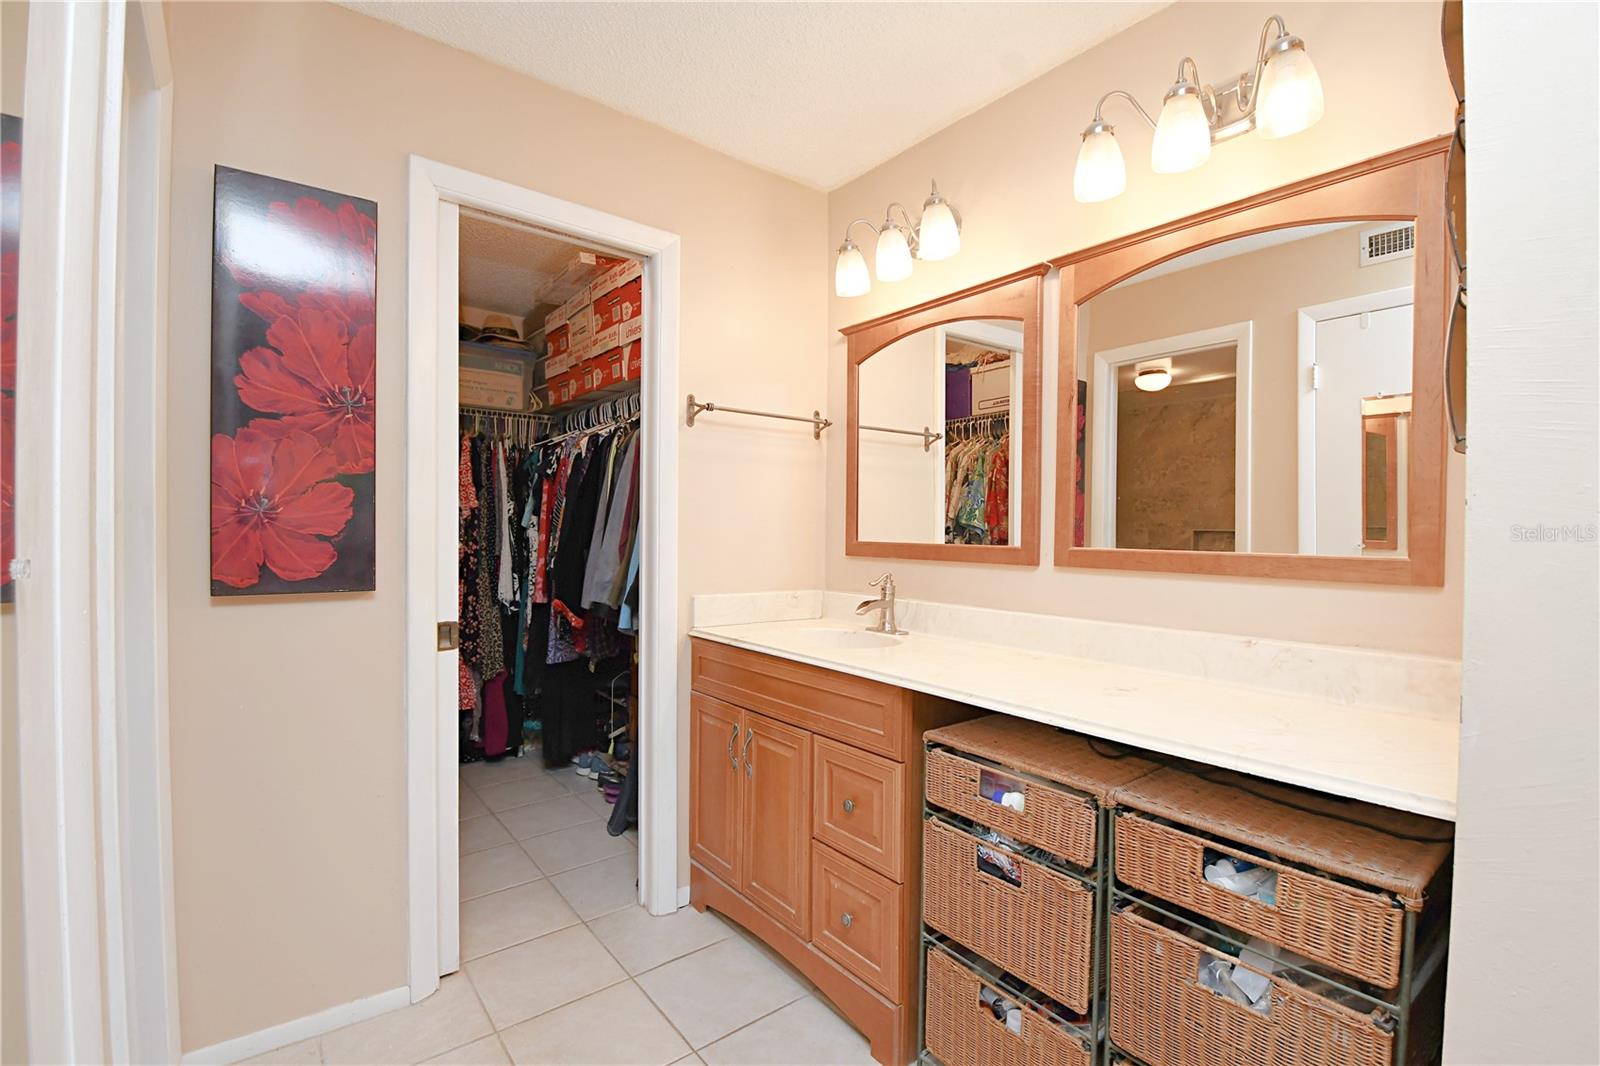 The en-suite bathroom features a large vanity featuring an extra makeup area and two mirrors.